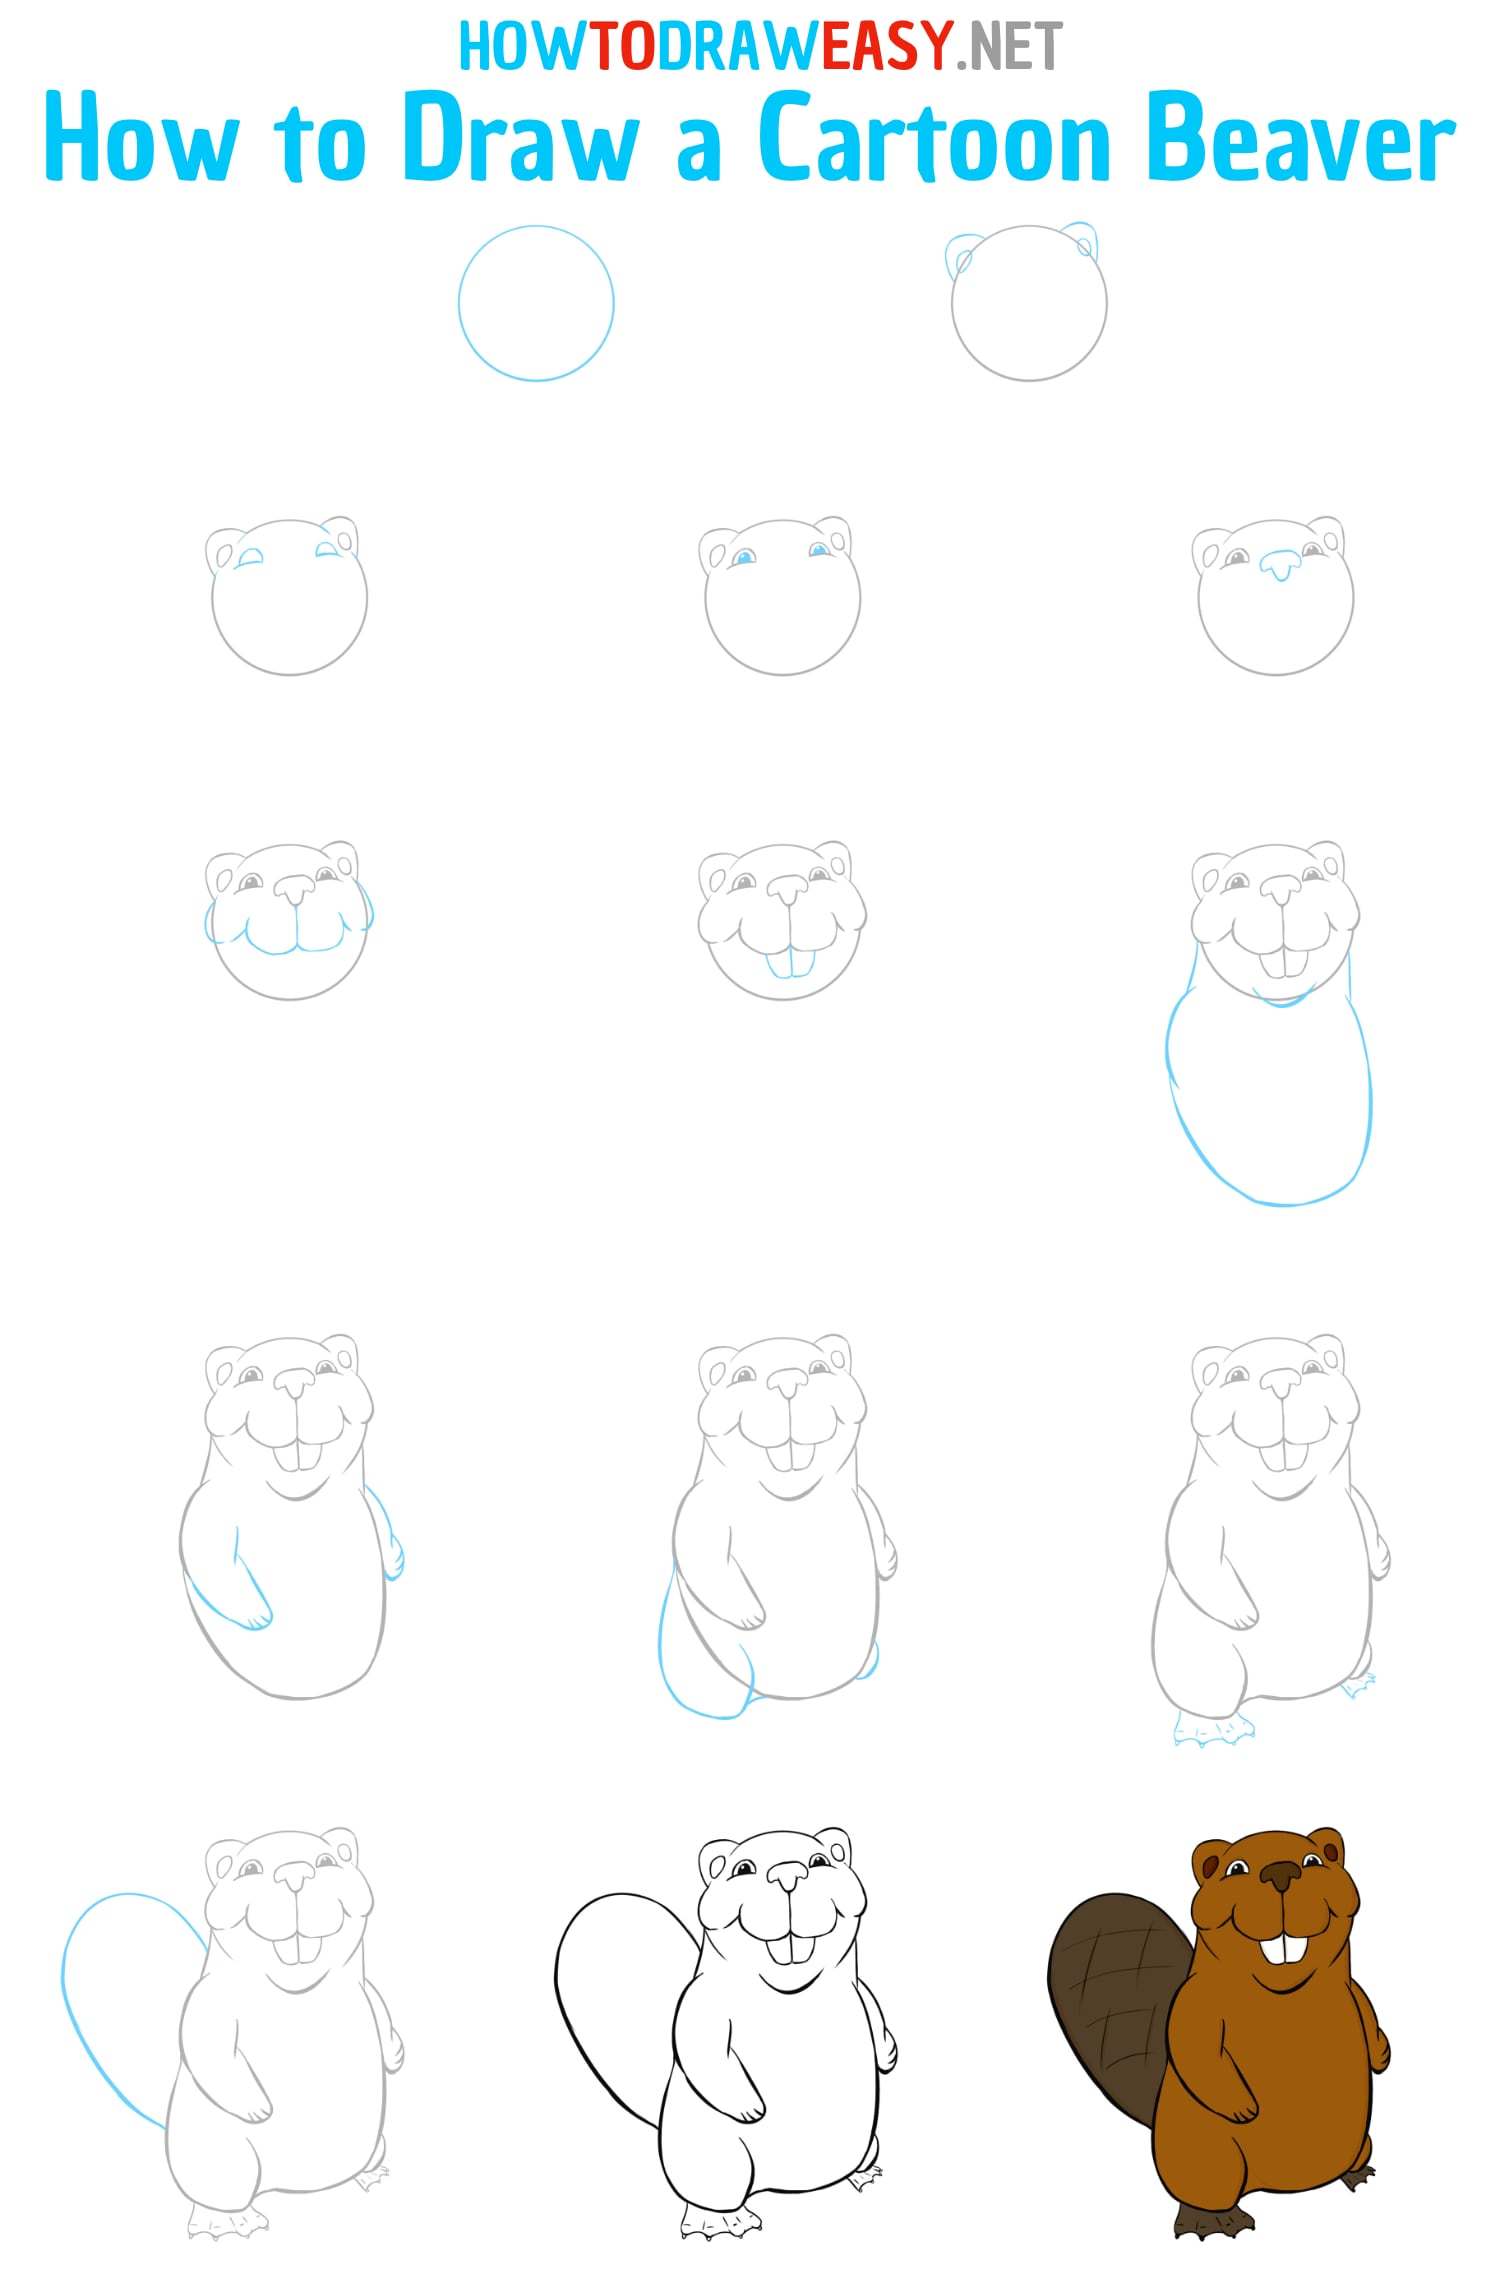 How to Draw a Cartoon Beaver Step by Step